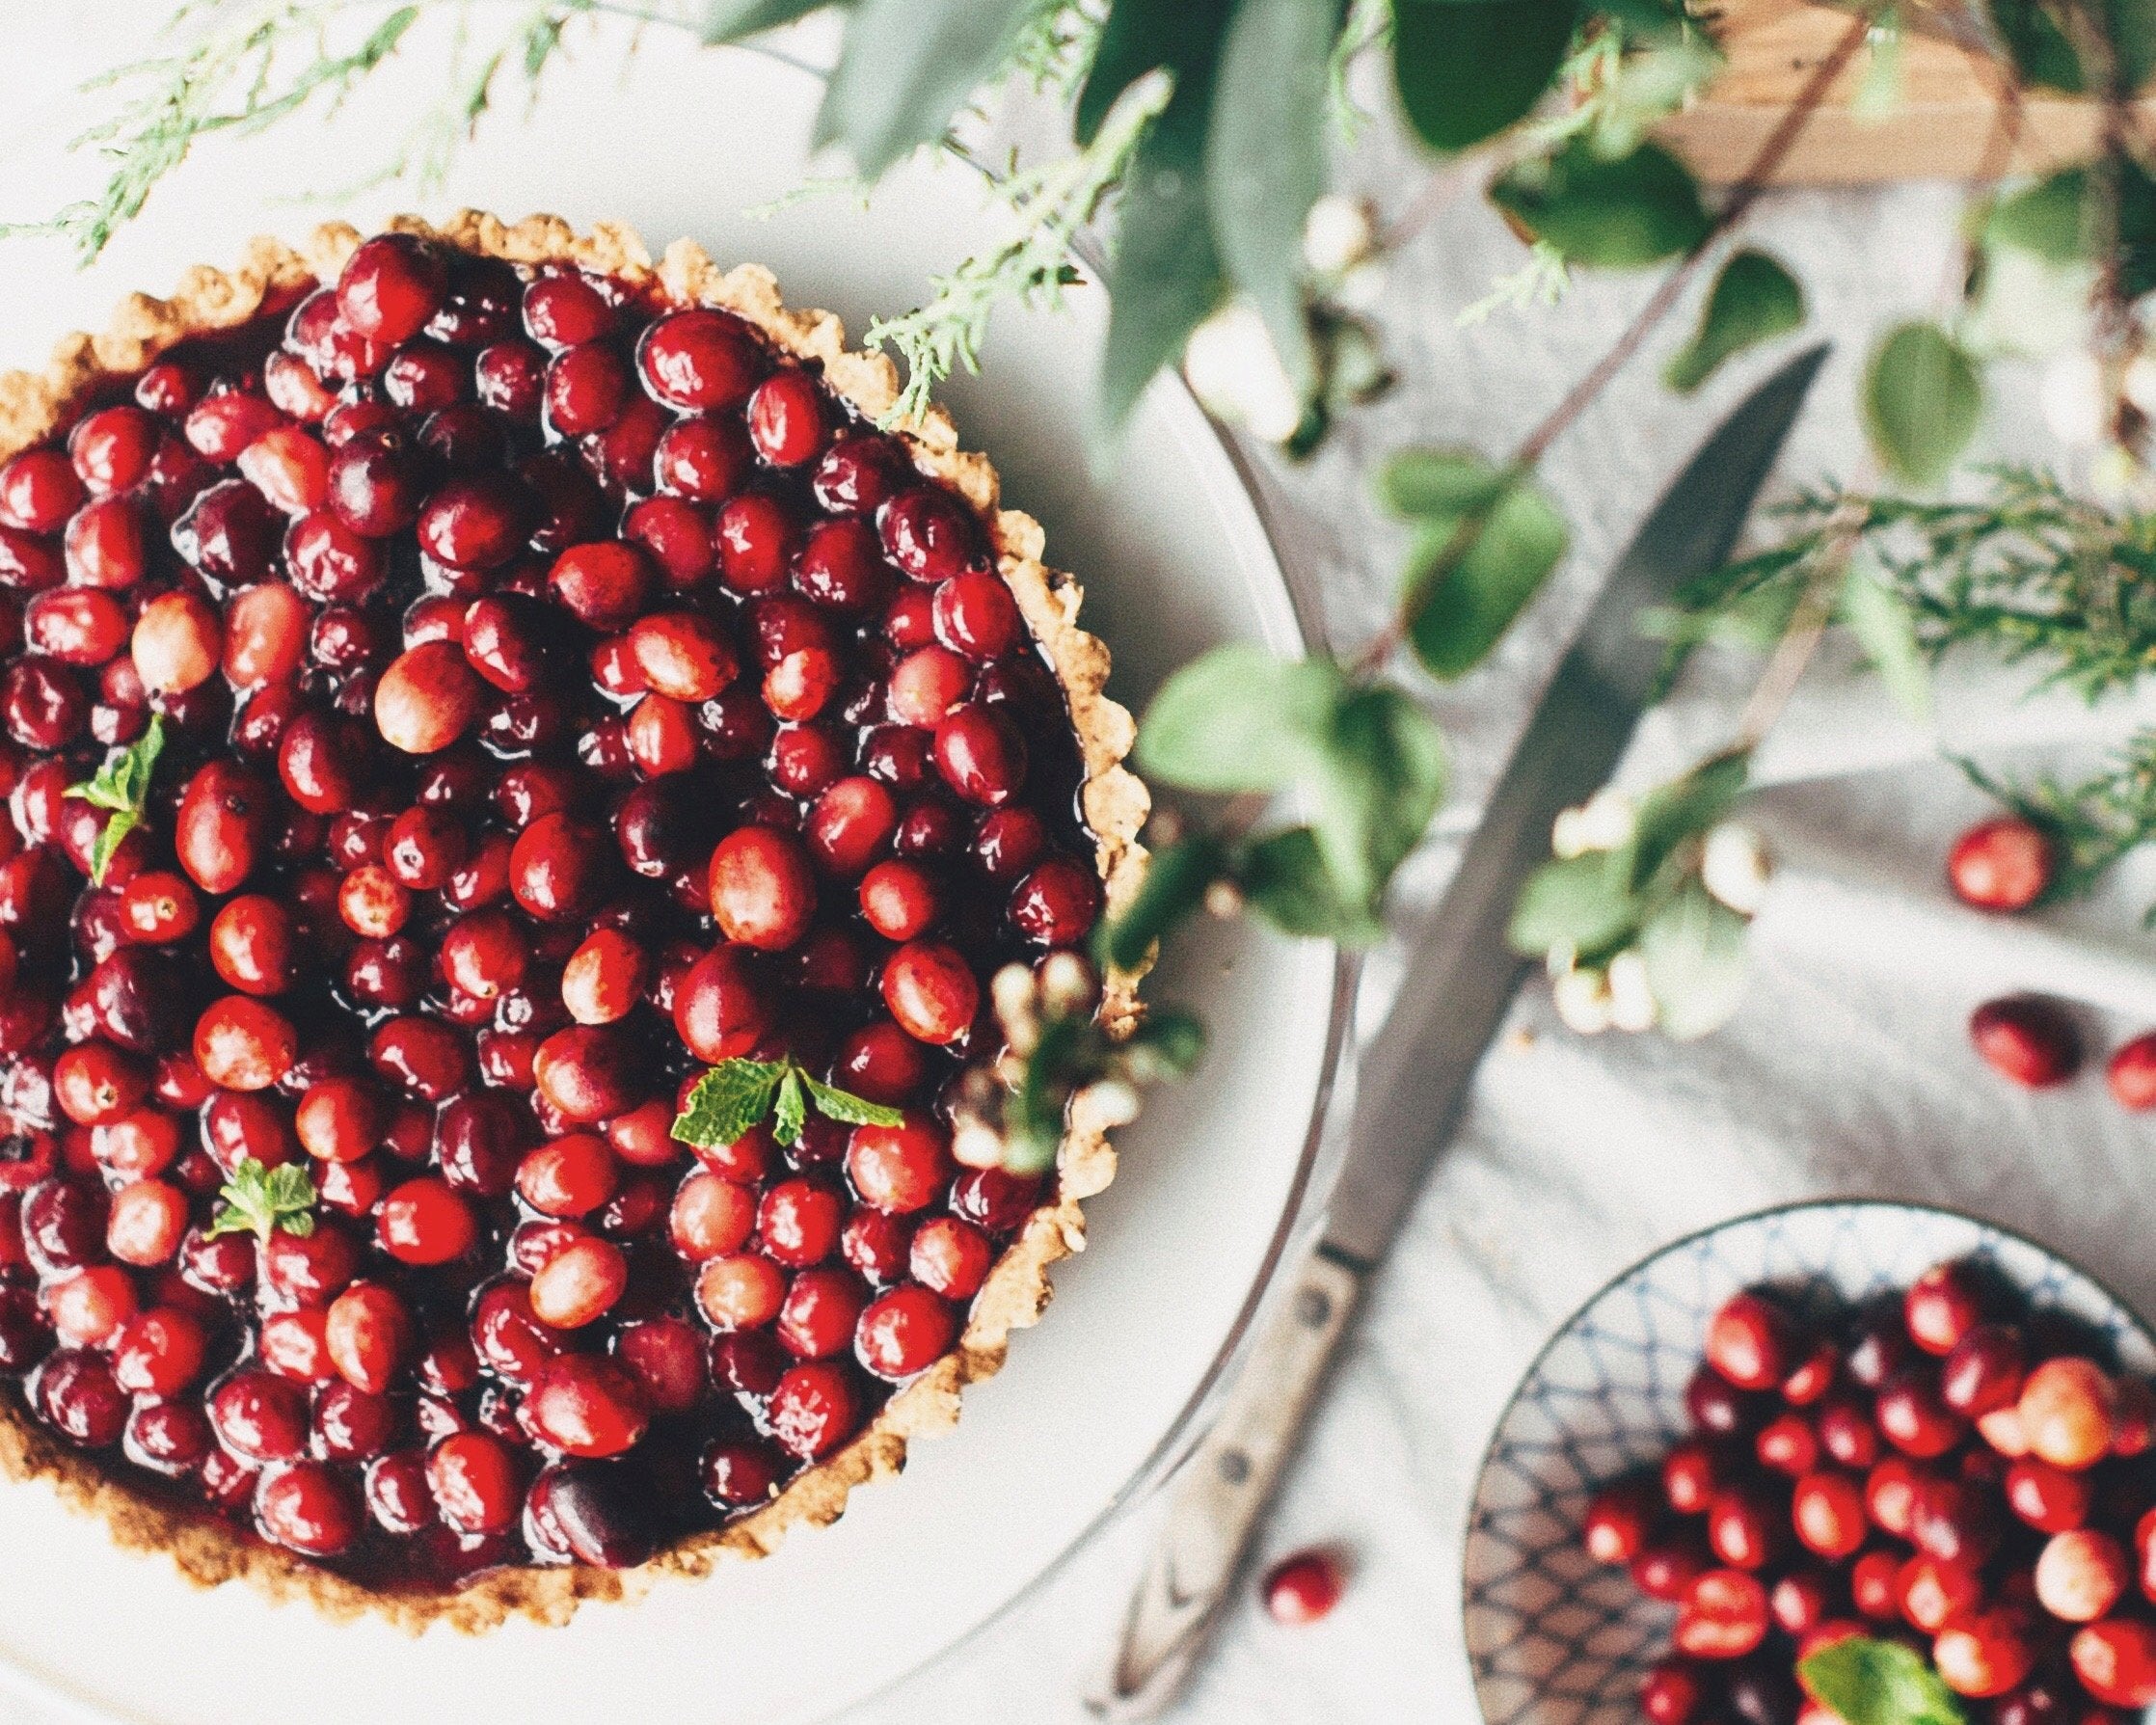 Holiday Eating For Healthy Mind, Body + Spirit by Fran Allen